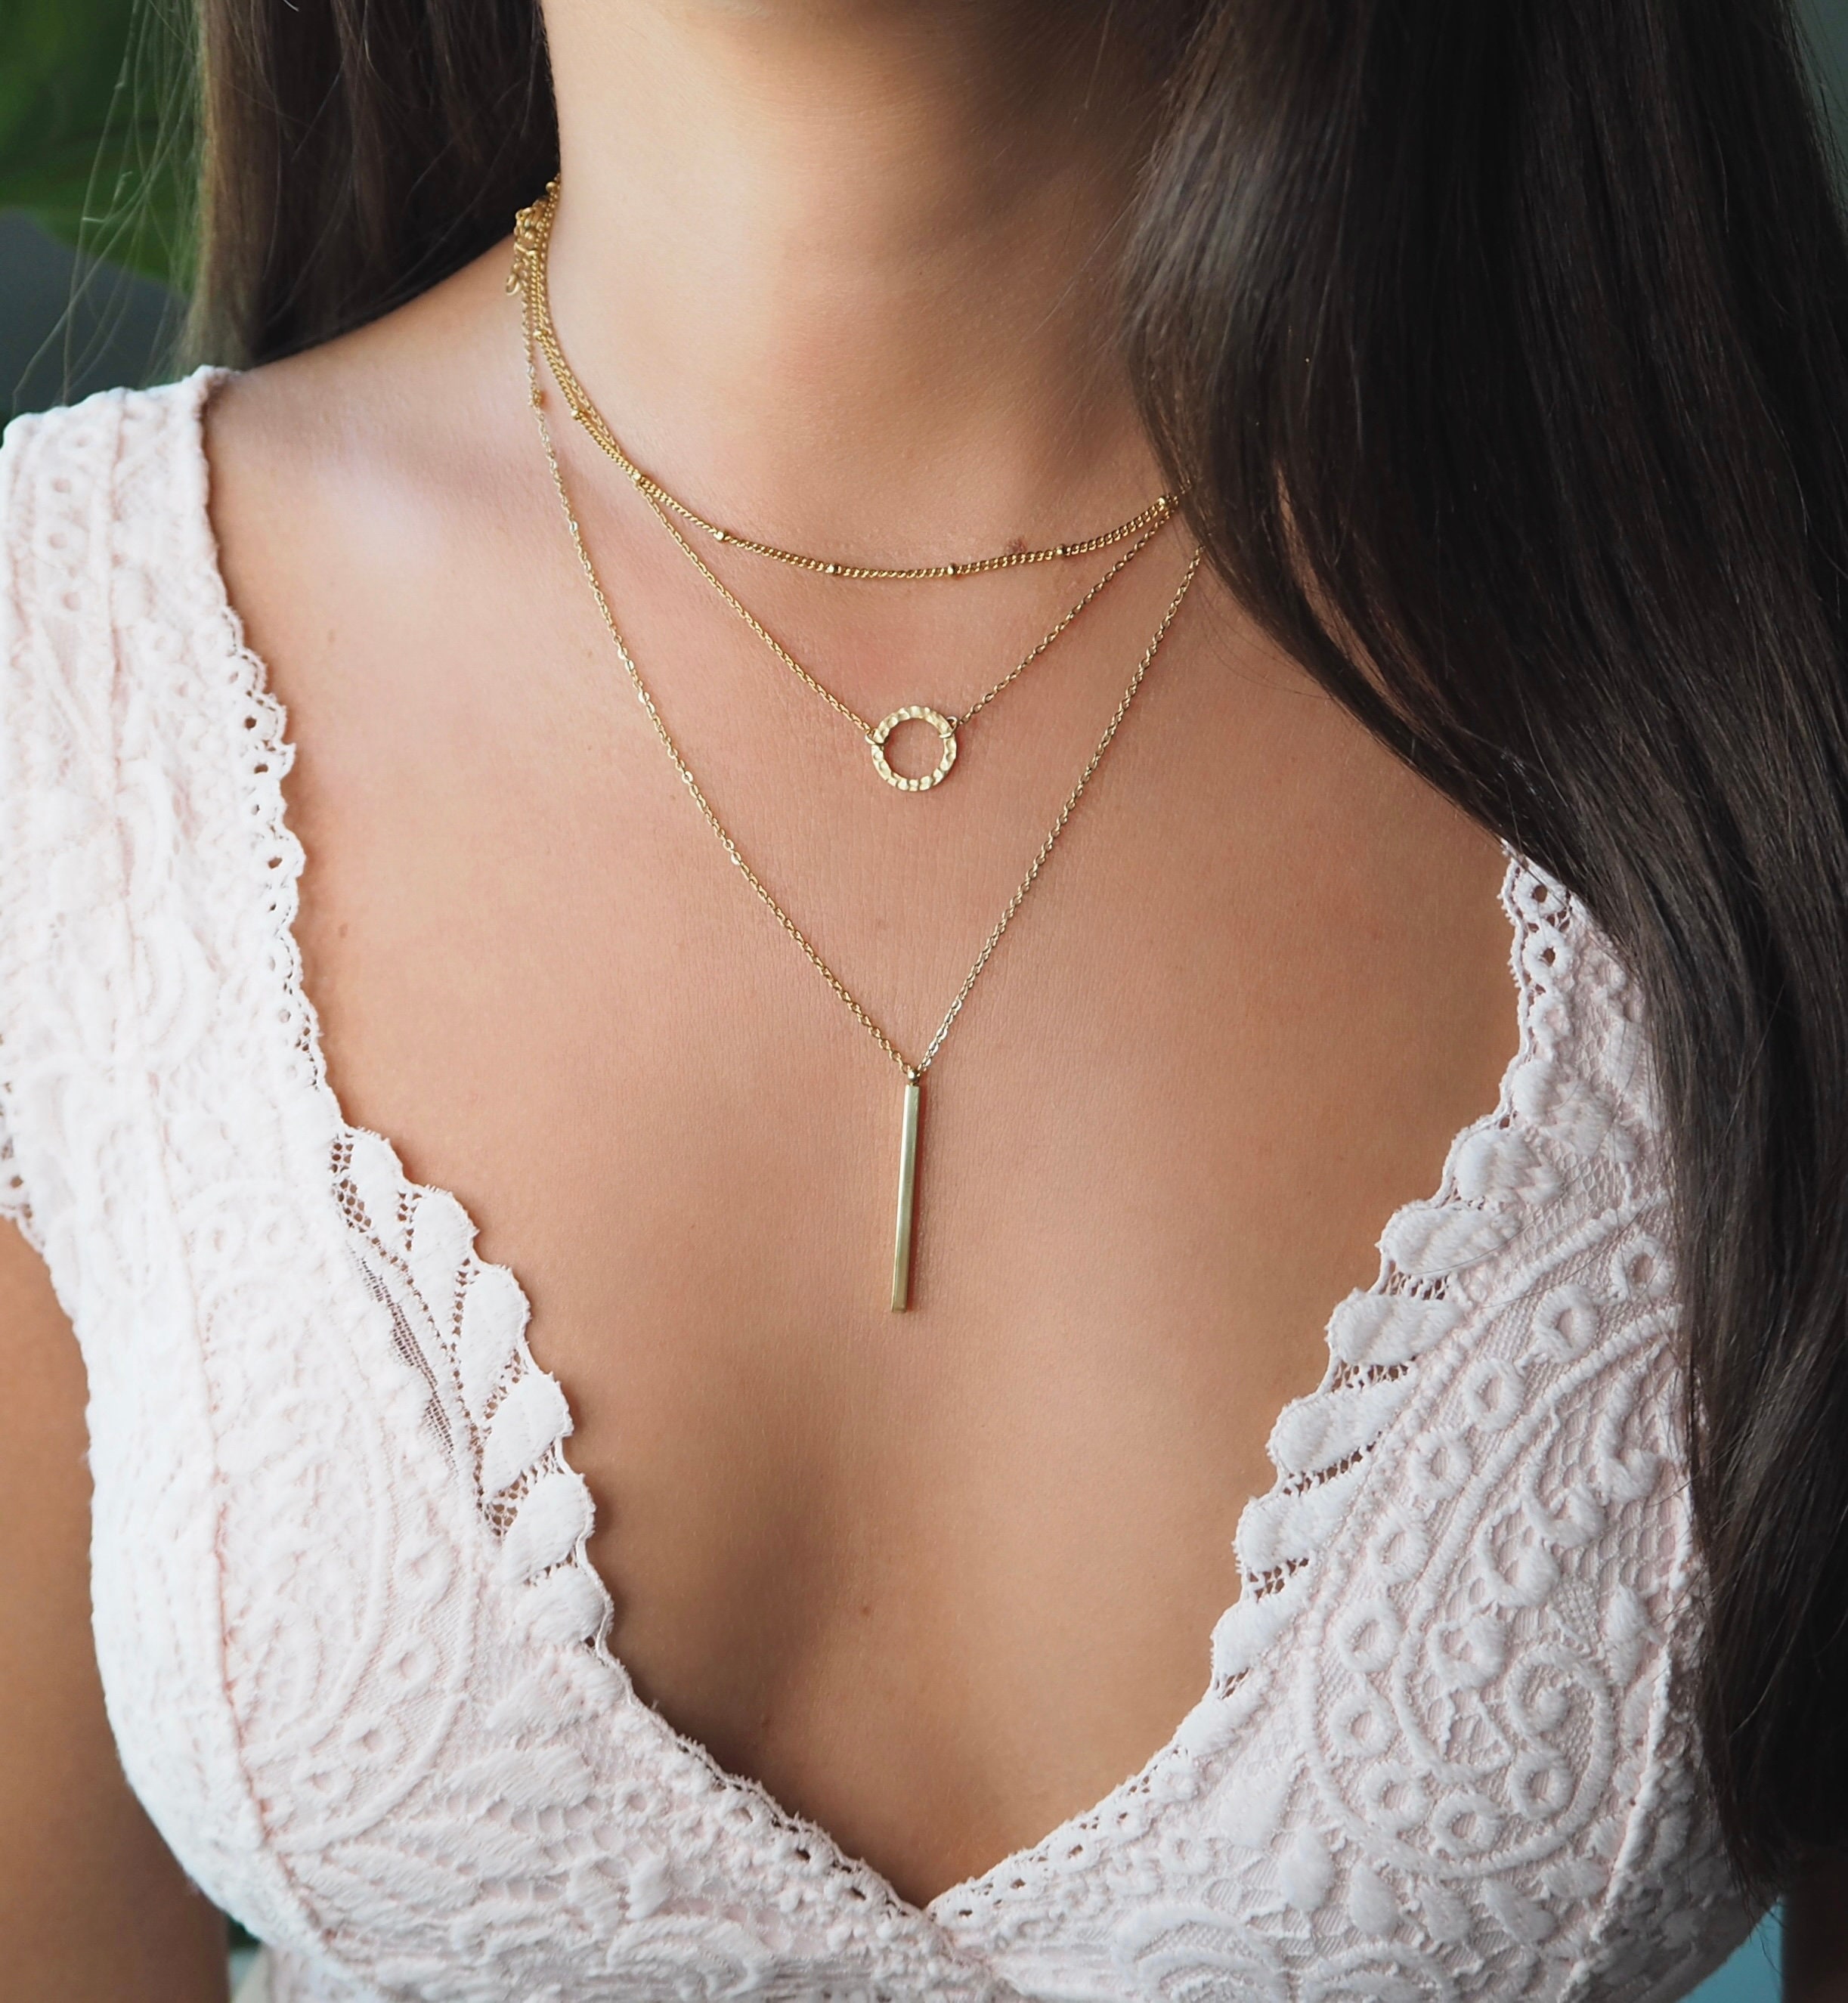 Necklaces & Chains | Layered necklace | Freeup